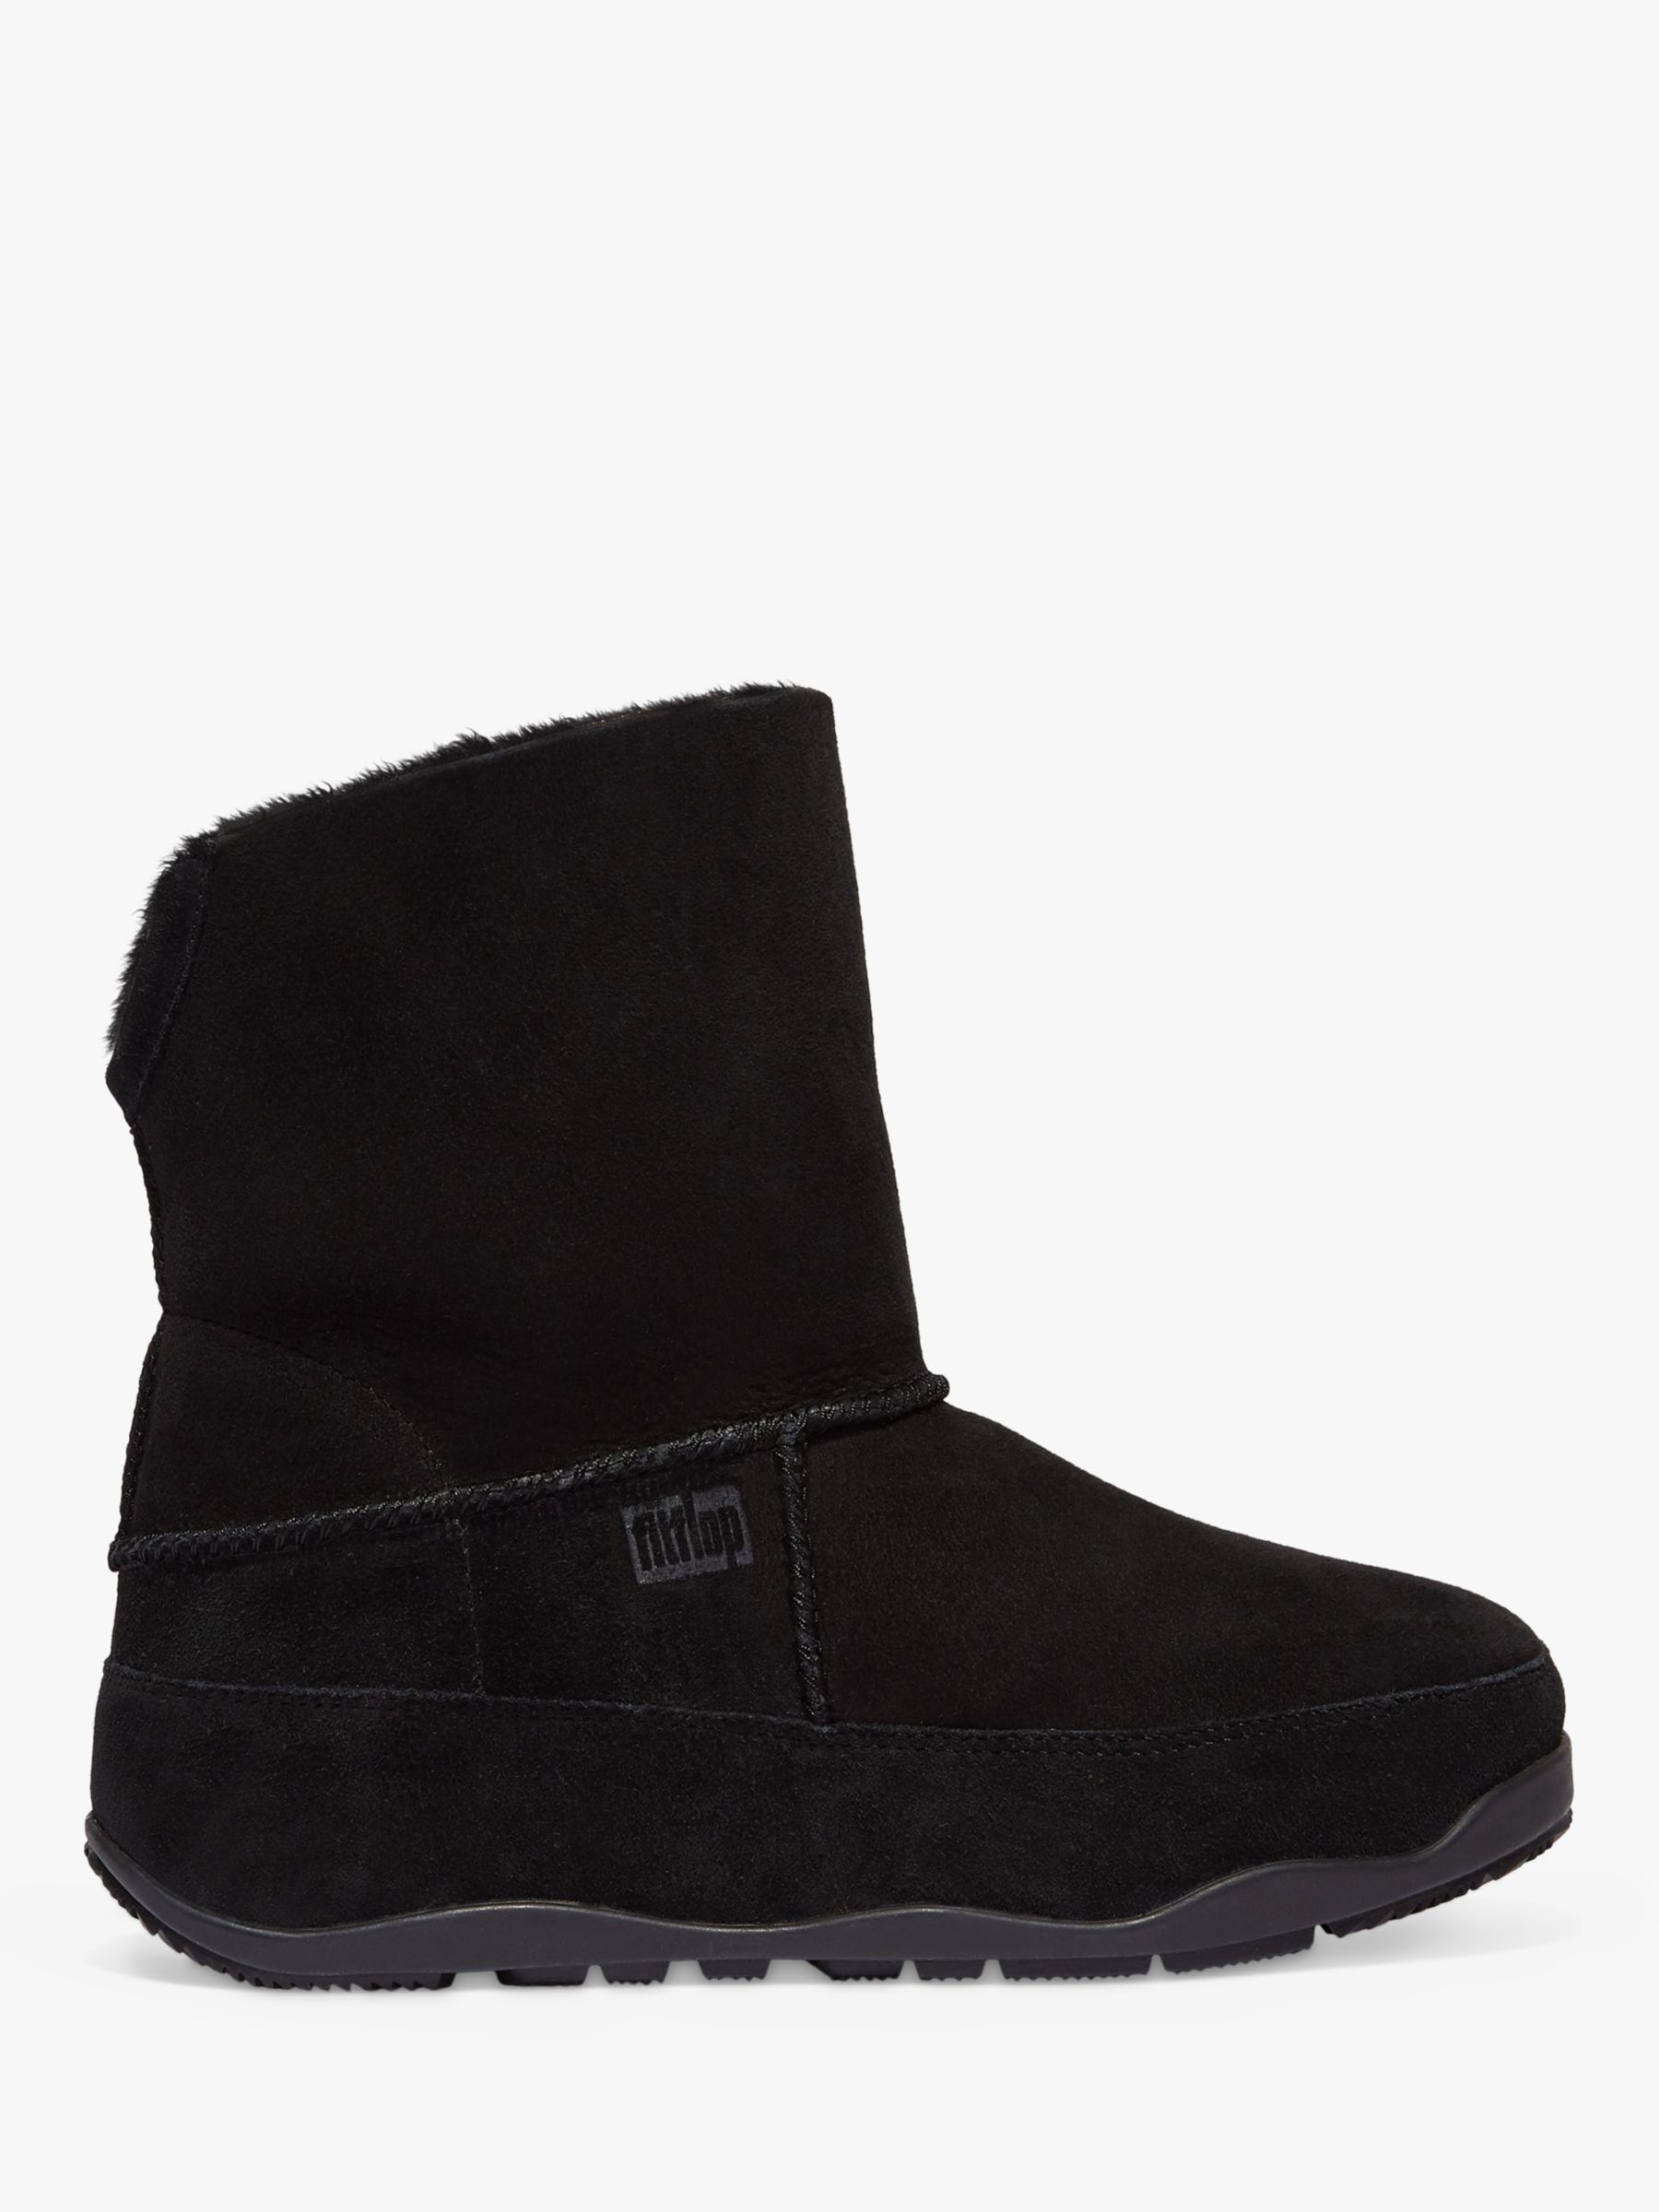 FitFlop Mukluk Suede Ankle Boots, Black at John Lewis & Partners